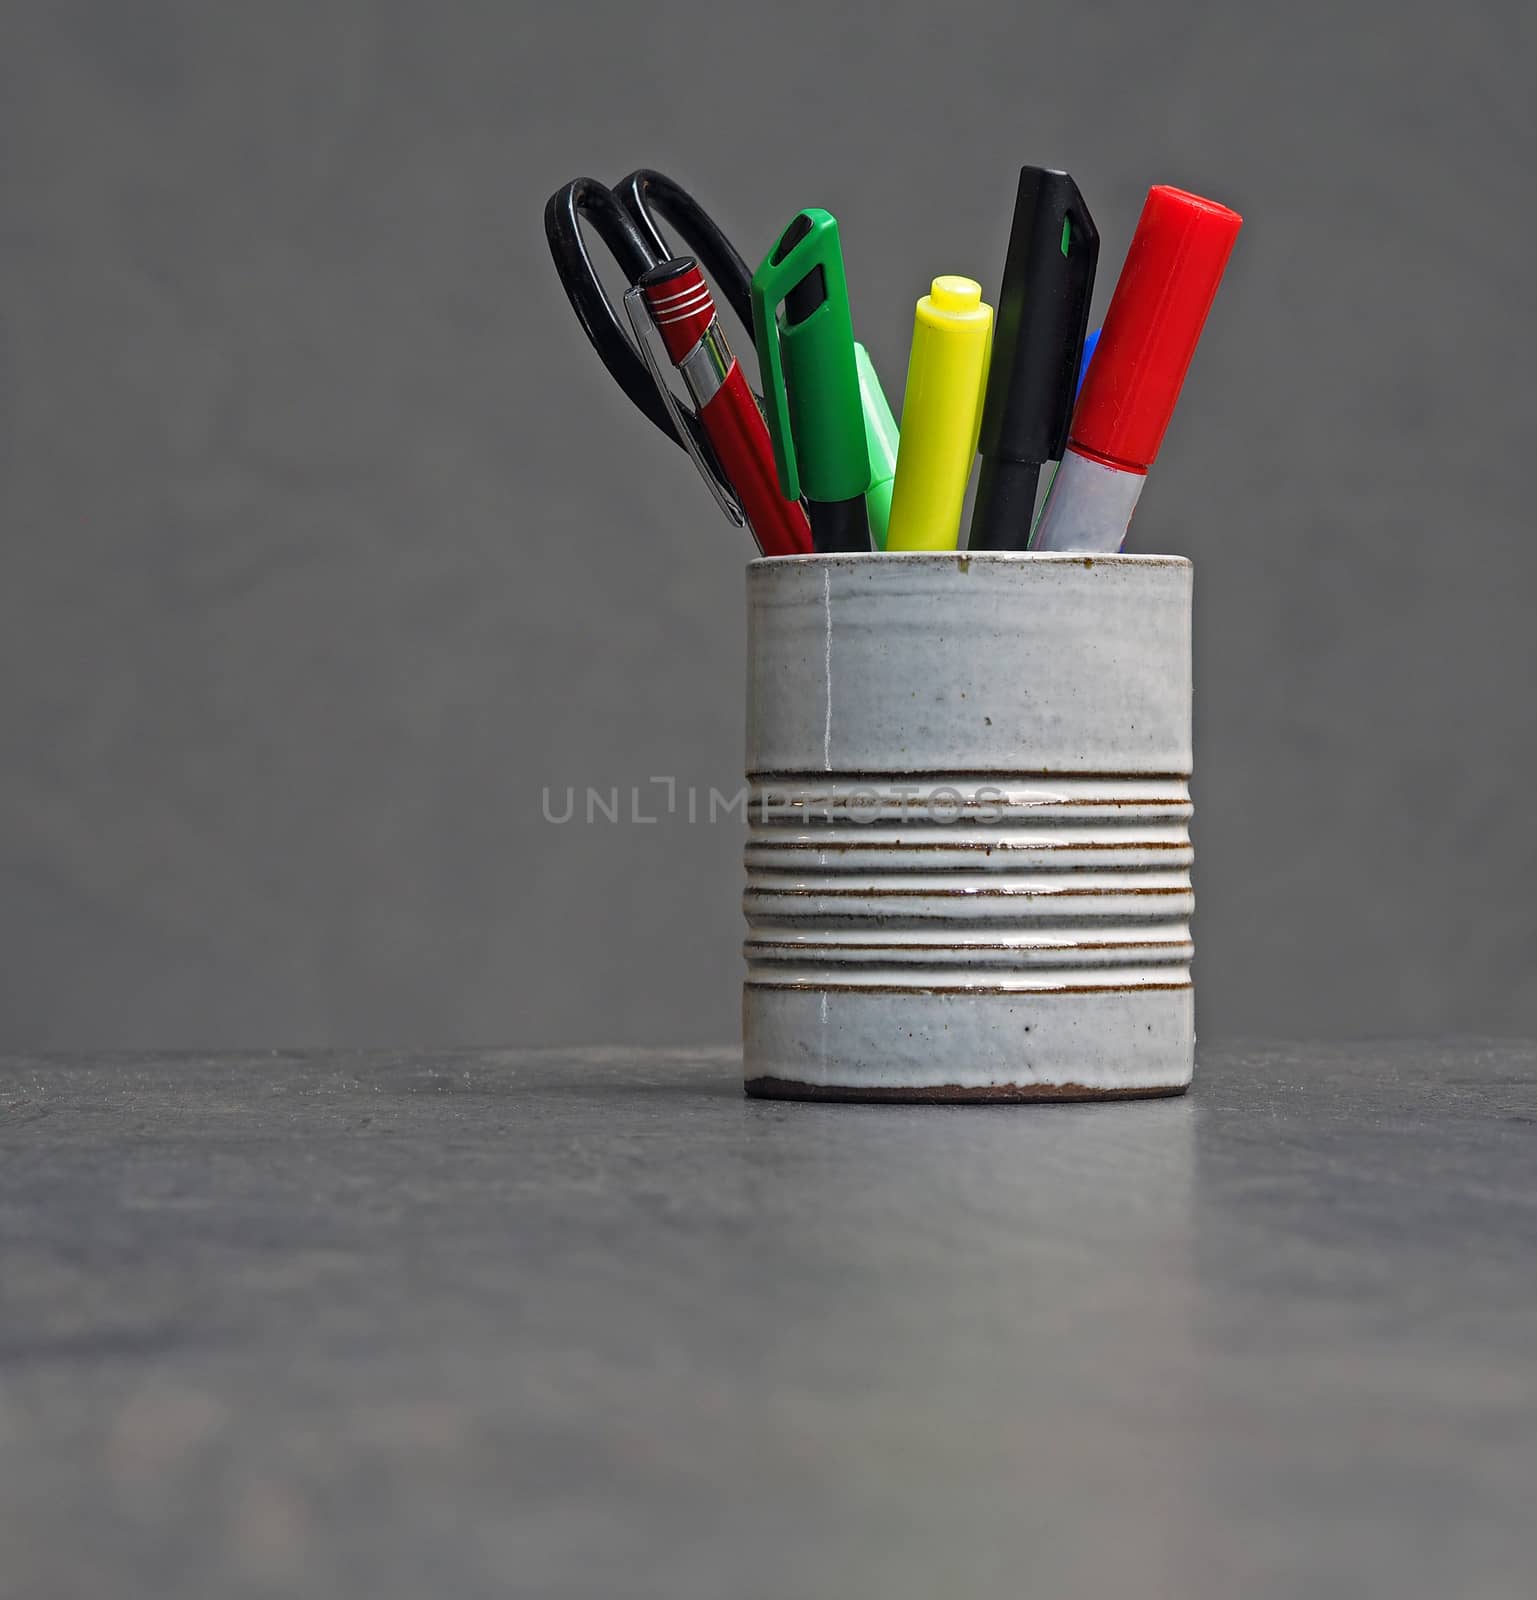 color office equipment in grey ceramic cup - markers, pen and scissors by Henkeova